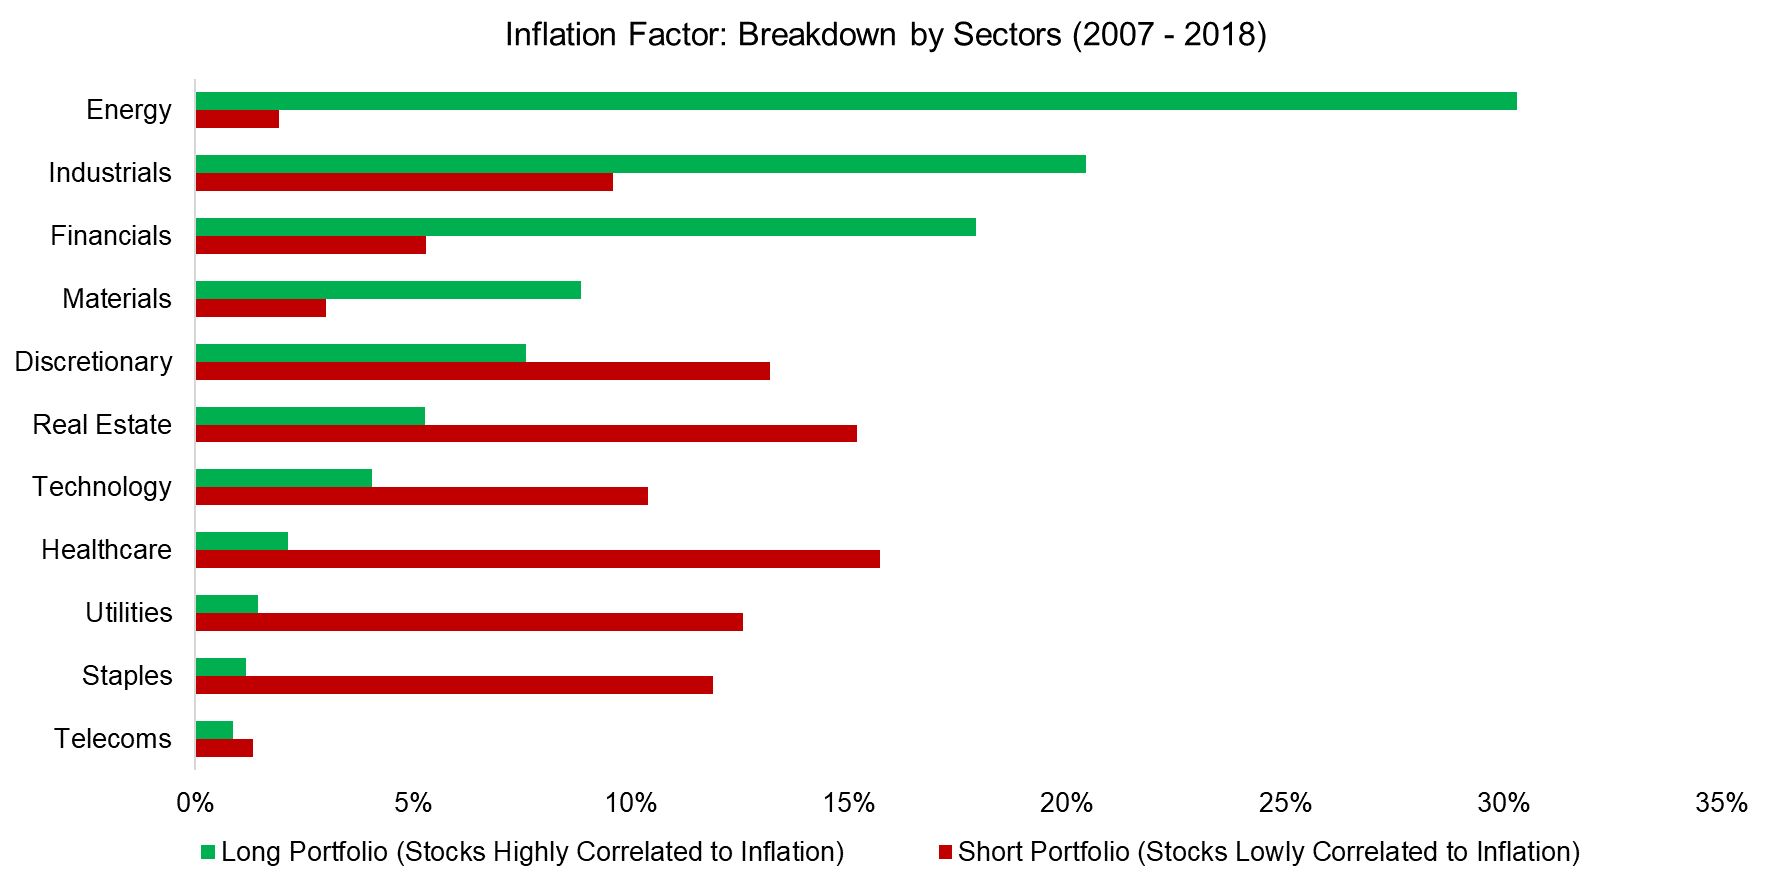 Inflation Factor Breakdown by Sectors (2007 - 2018)